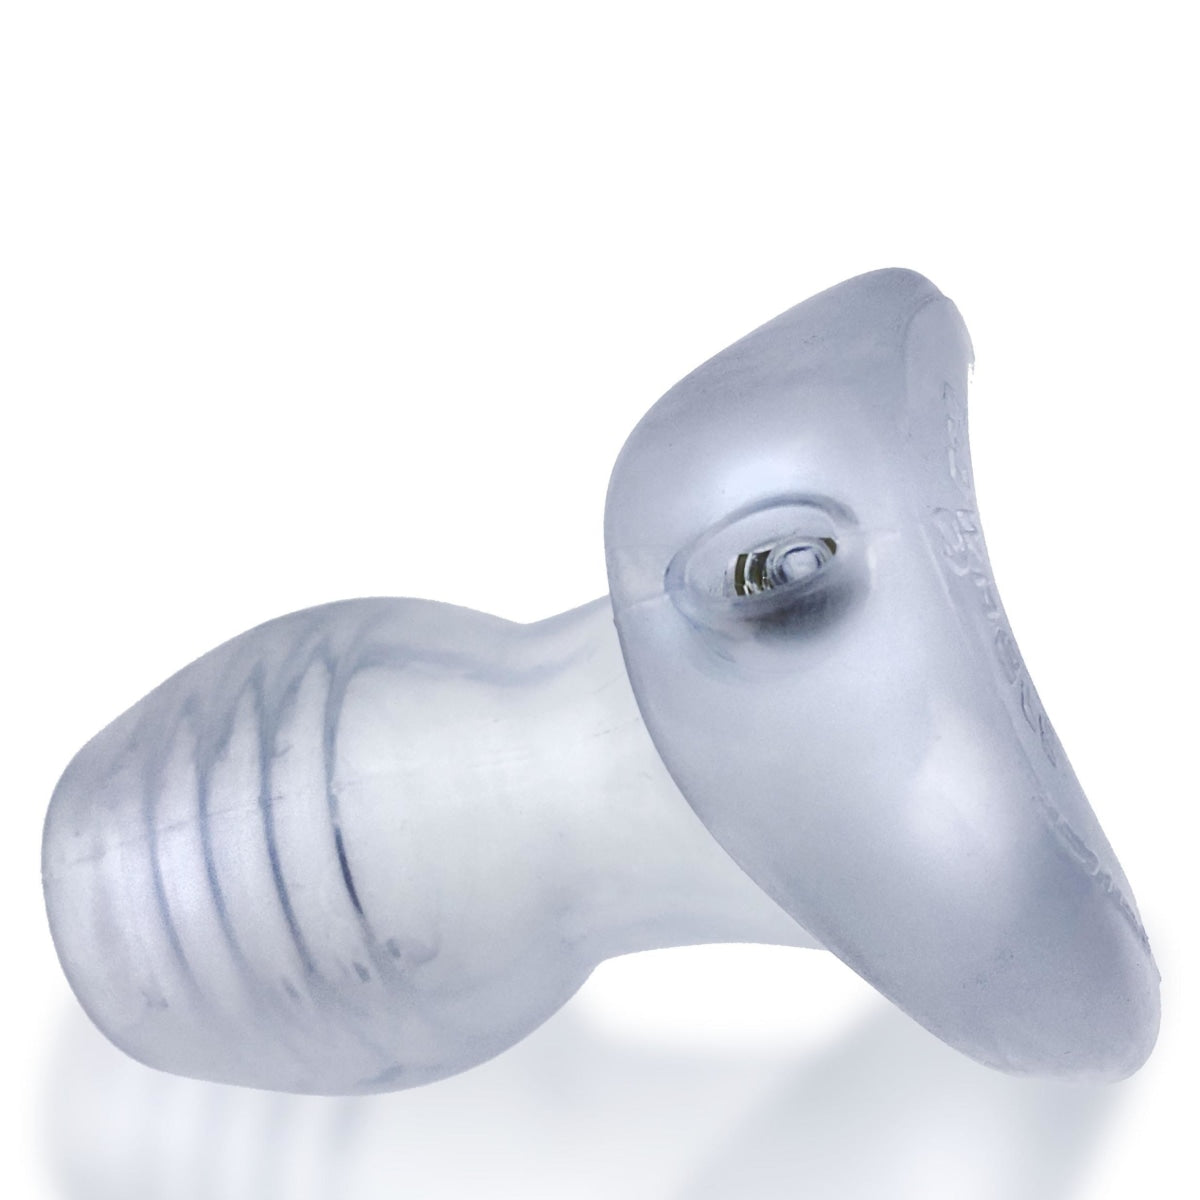 Glowhole-1 Buttplug W- Led Insert Small Clear Frost Intimates Adult Boutique